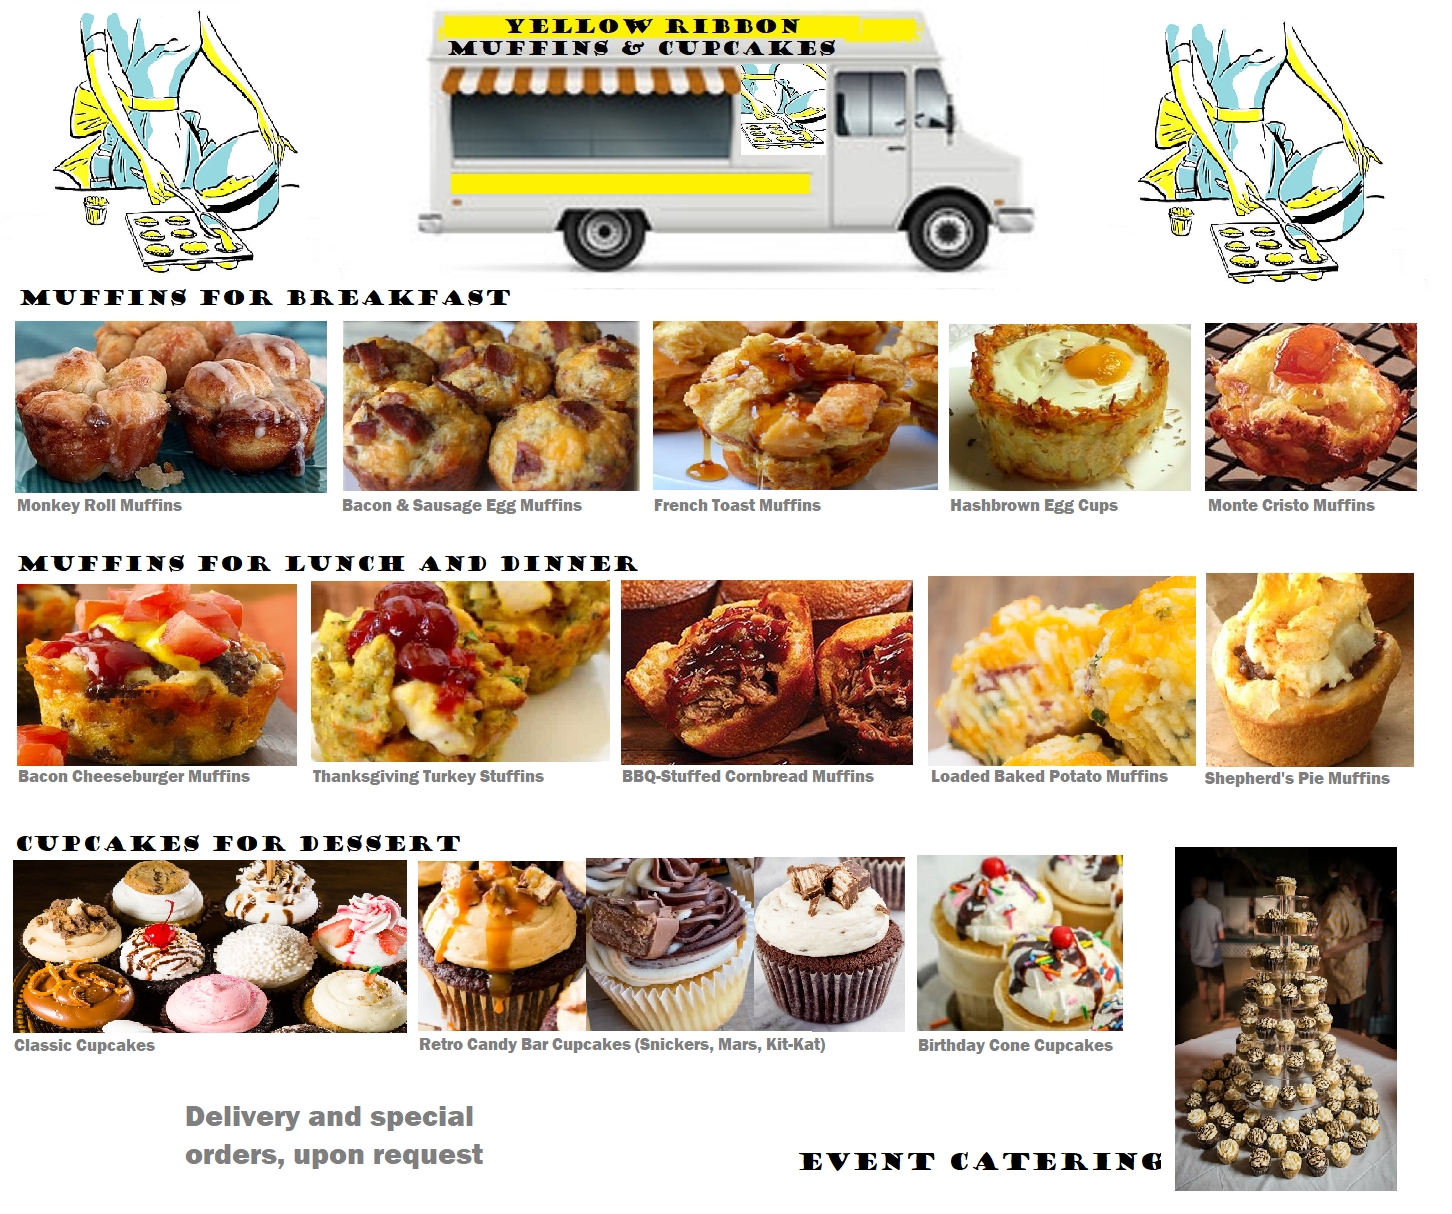 Every meal muffins menu - v3.png